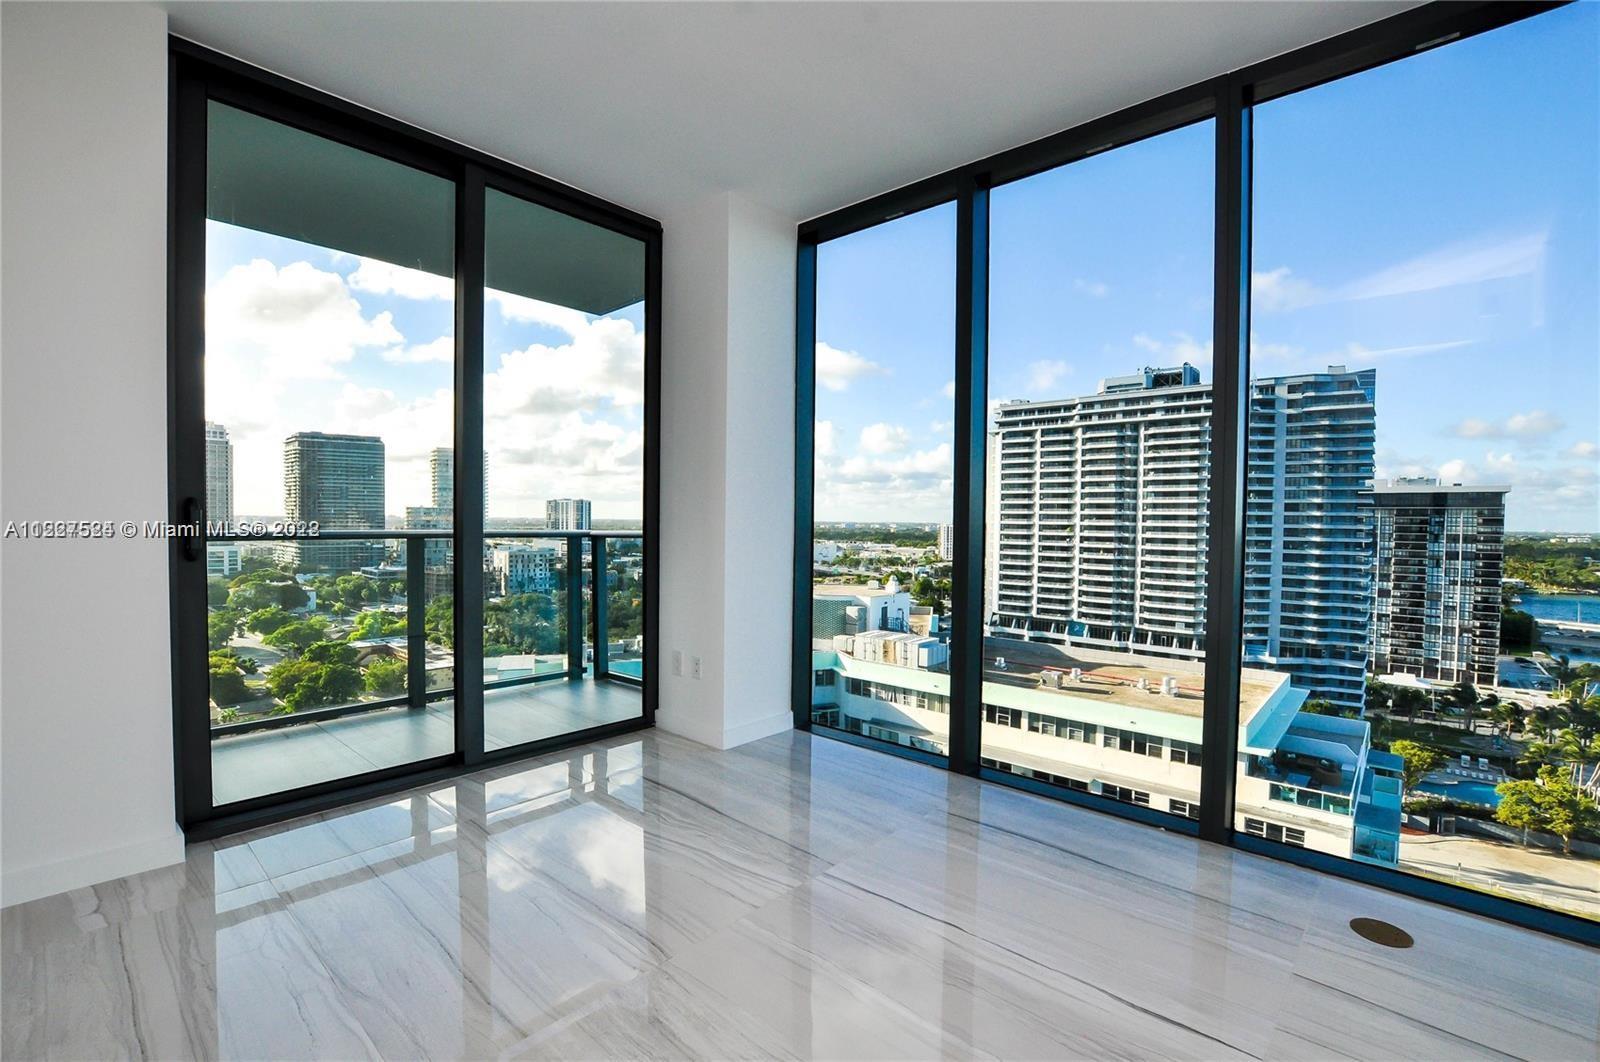 Unobstructed Bay views overlooking Biscayne Bay with spectacular views from every room. Located in t